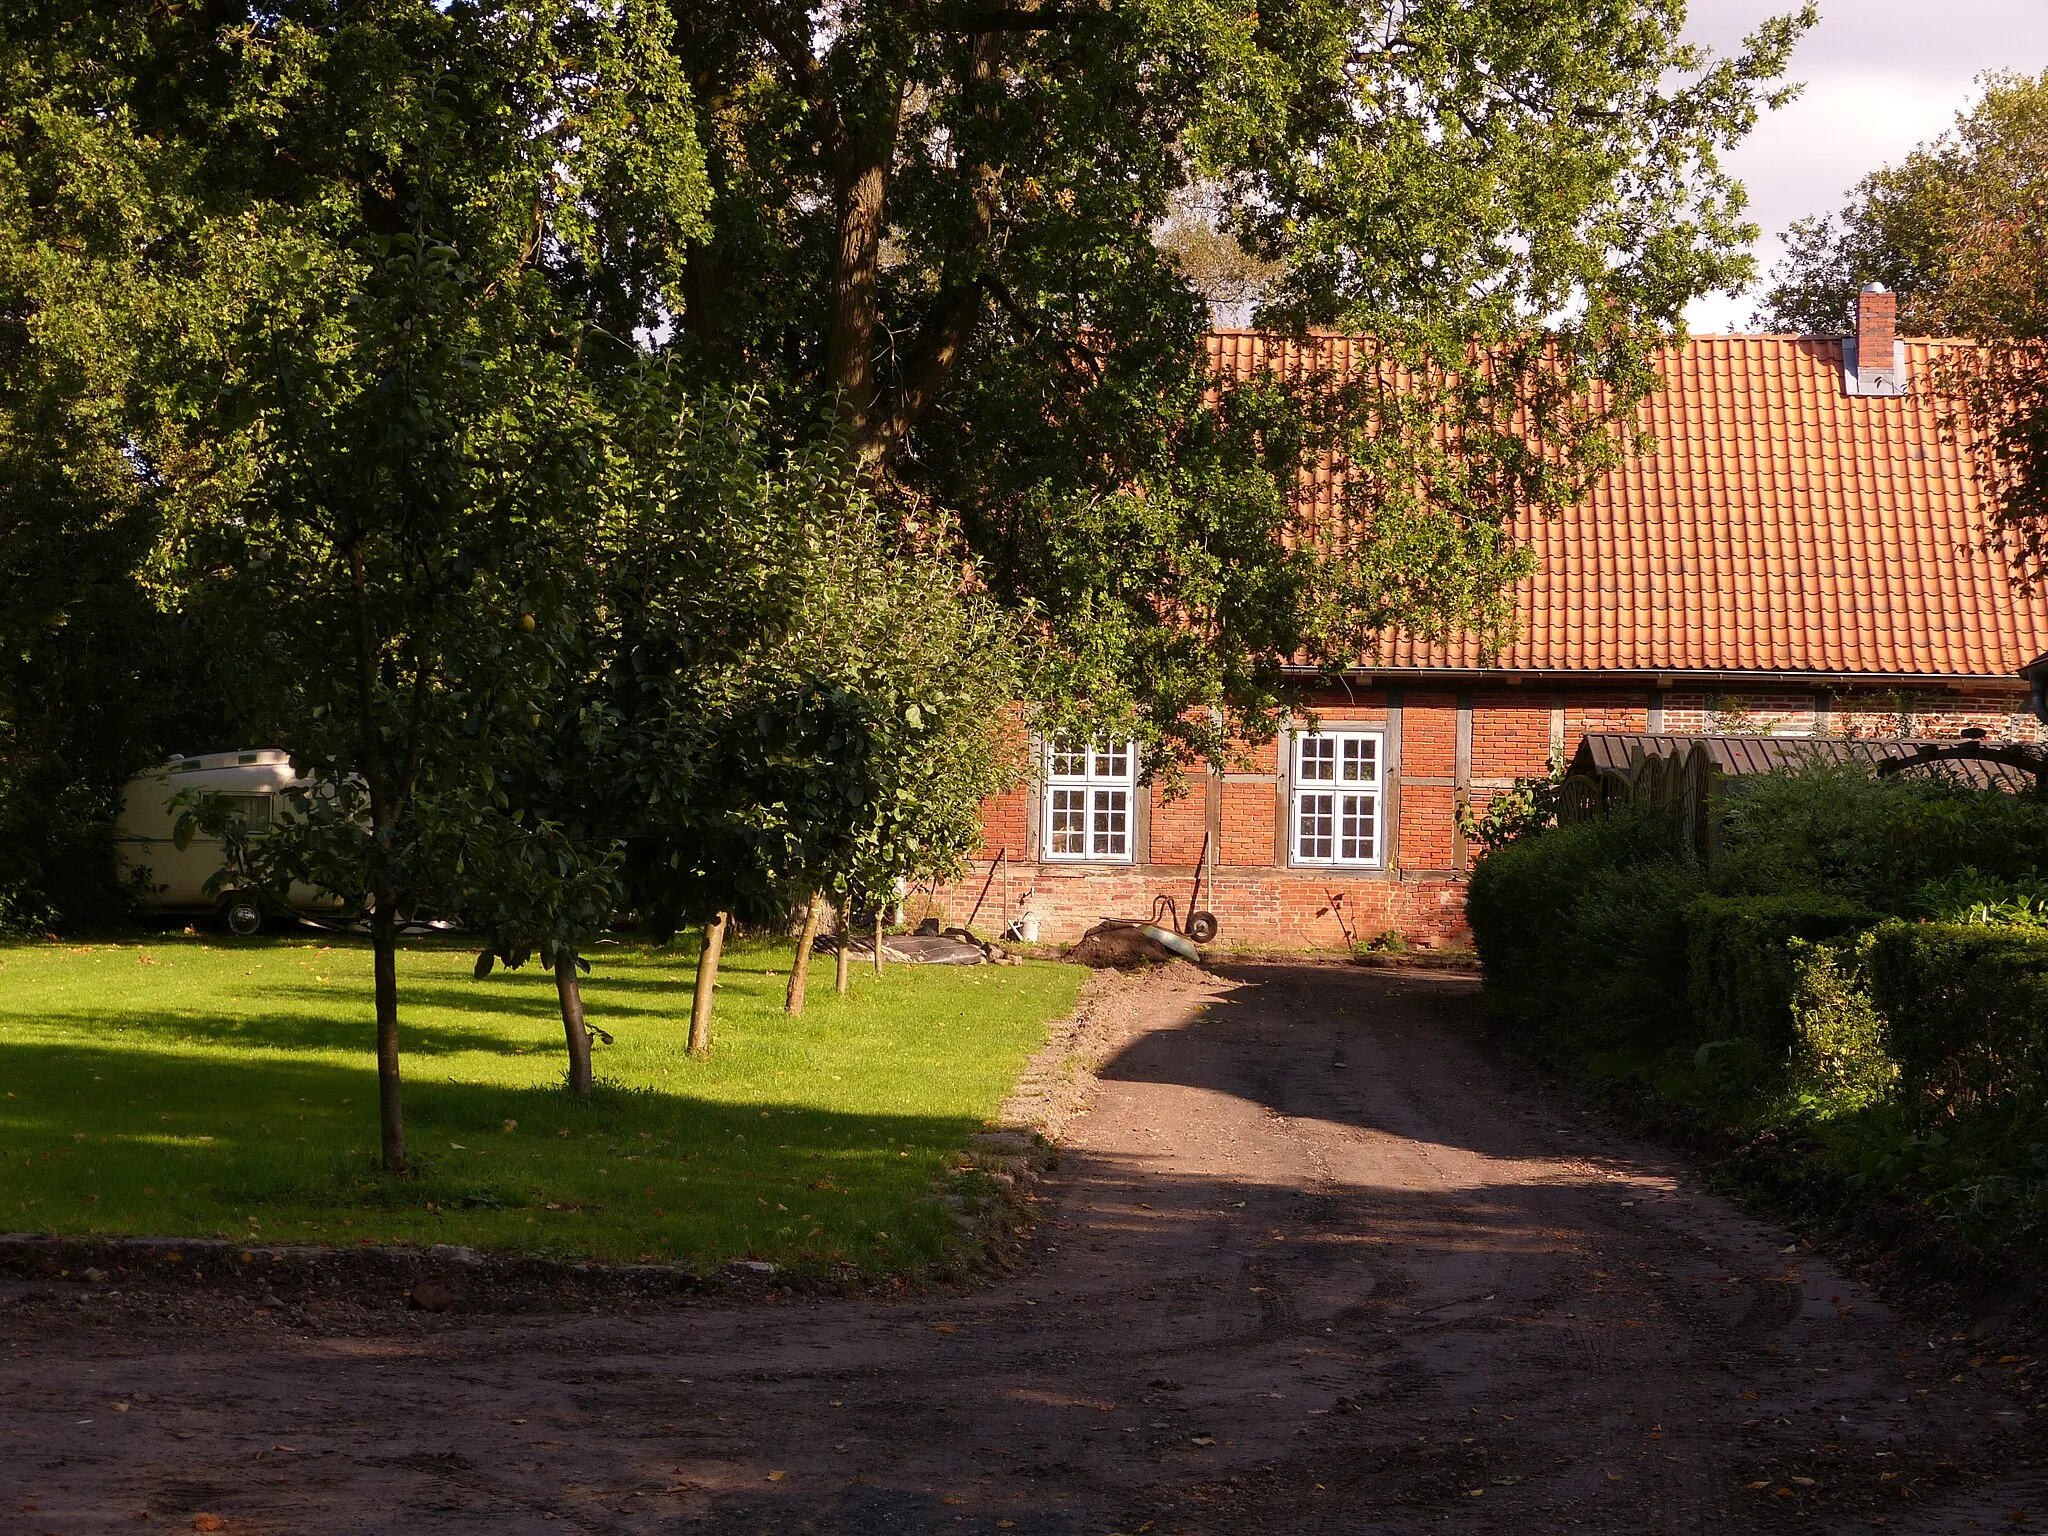 Image of Tangstedt